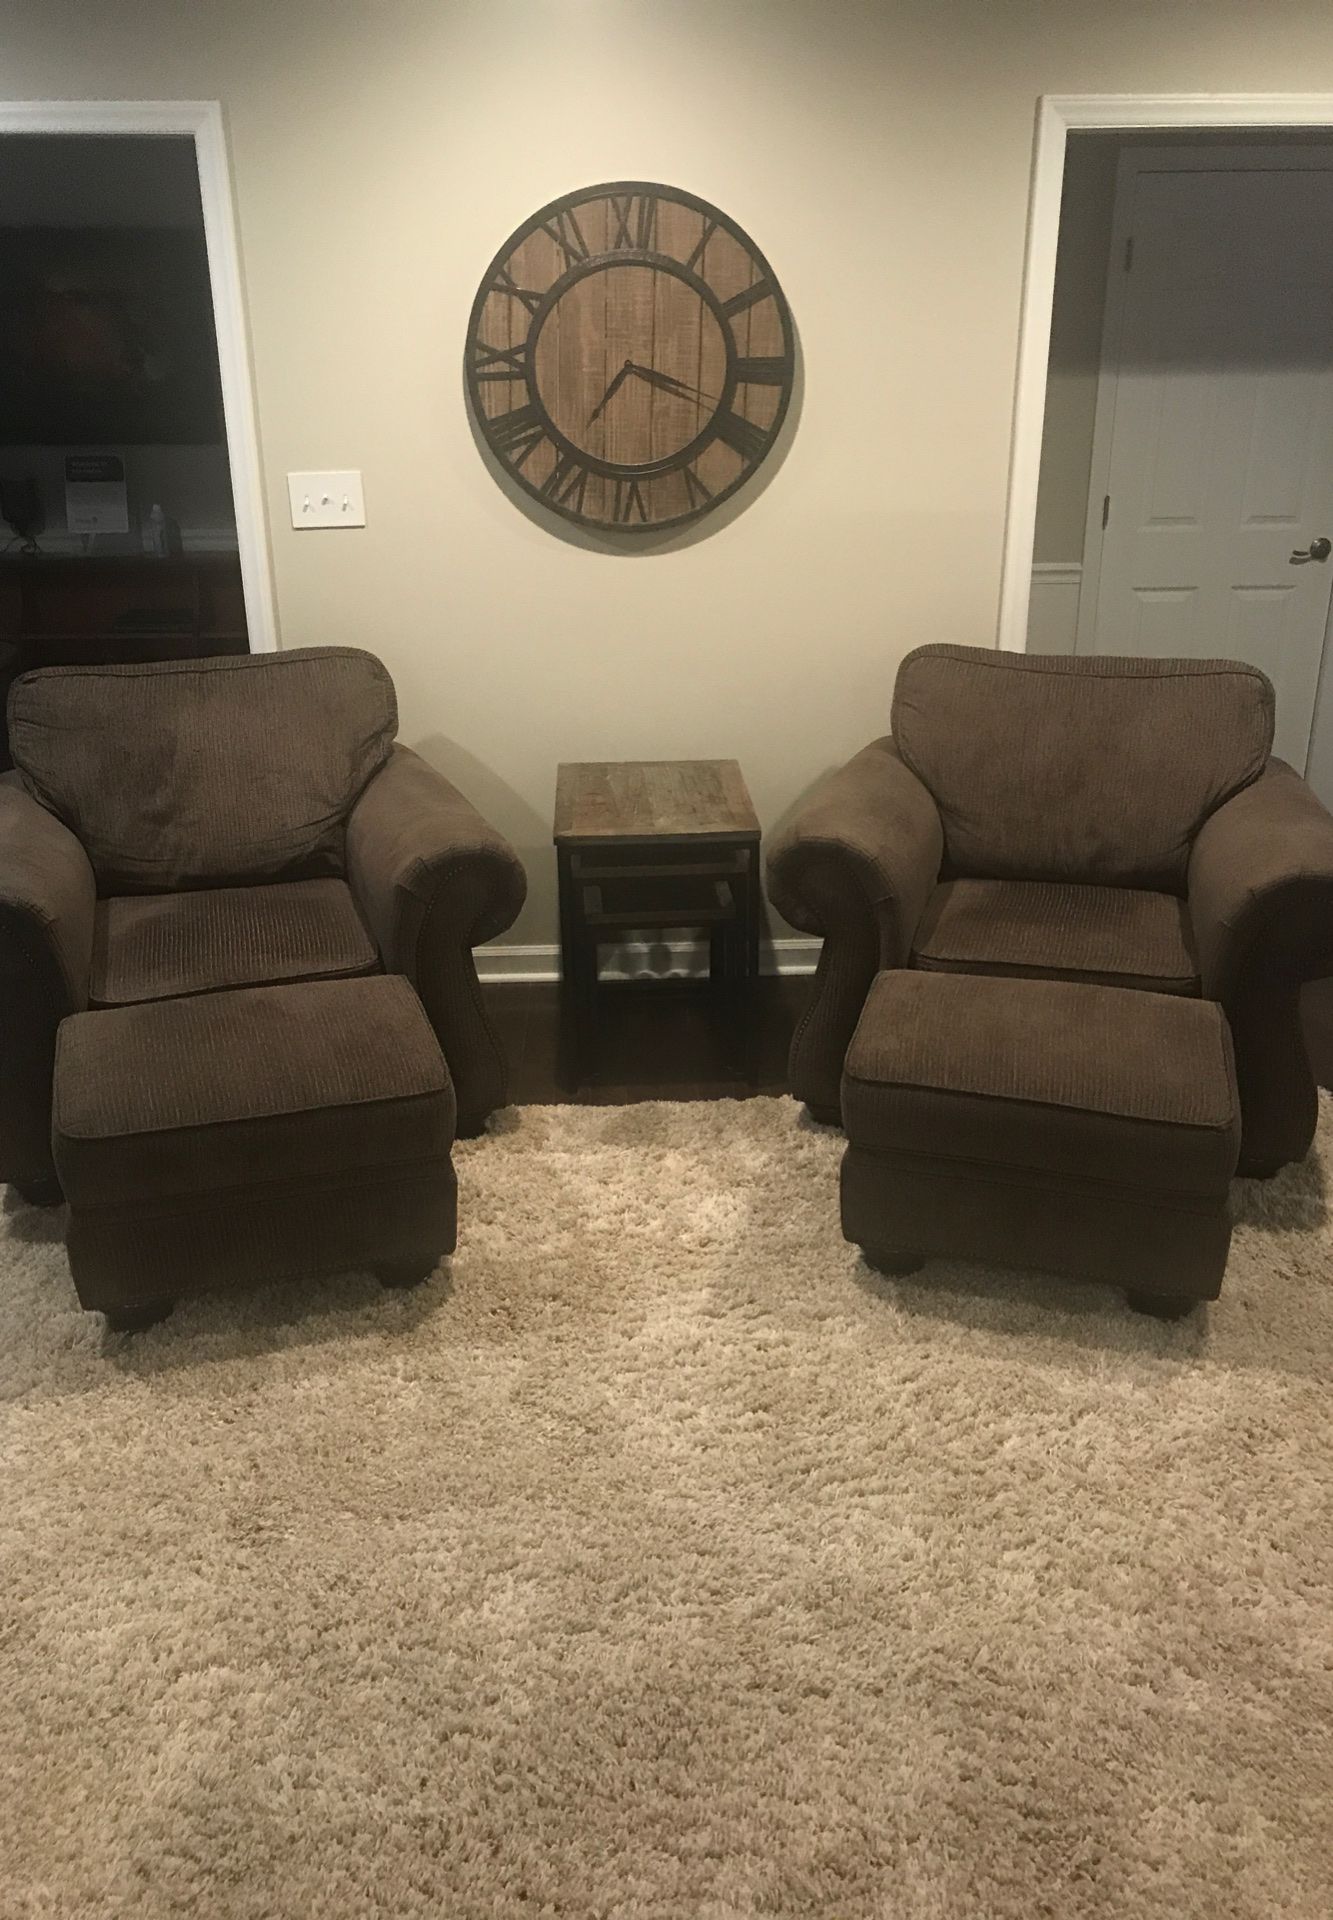 Broyhill furniture, 2 chairs, 2 ottamans, 2 couches.